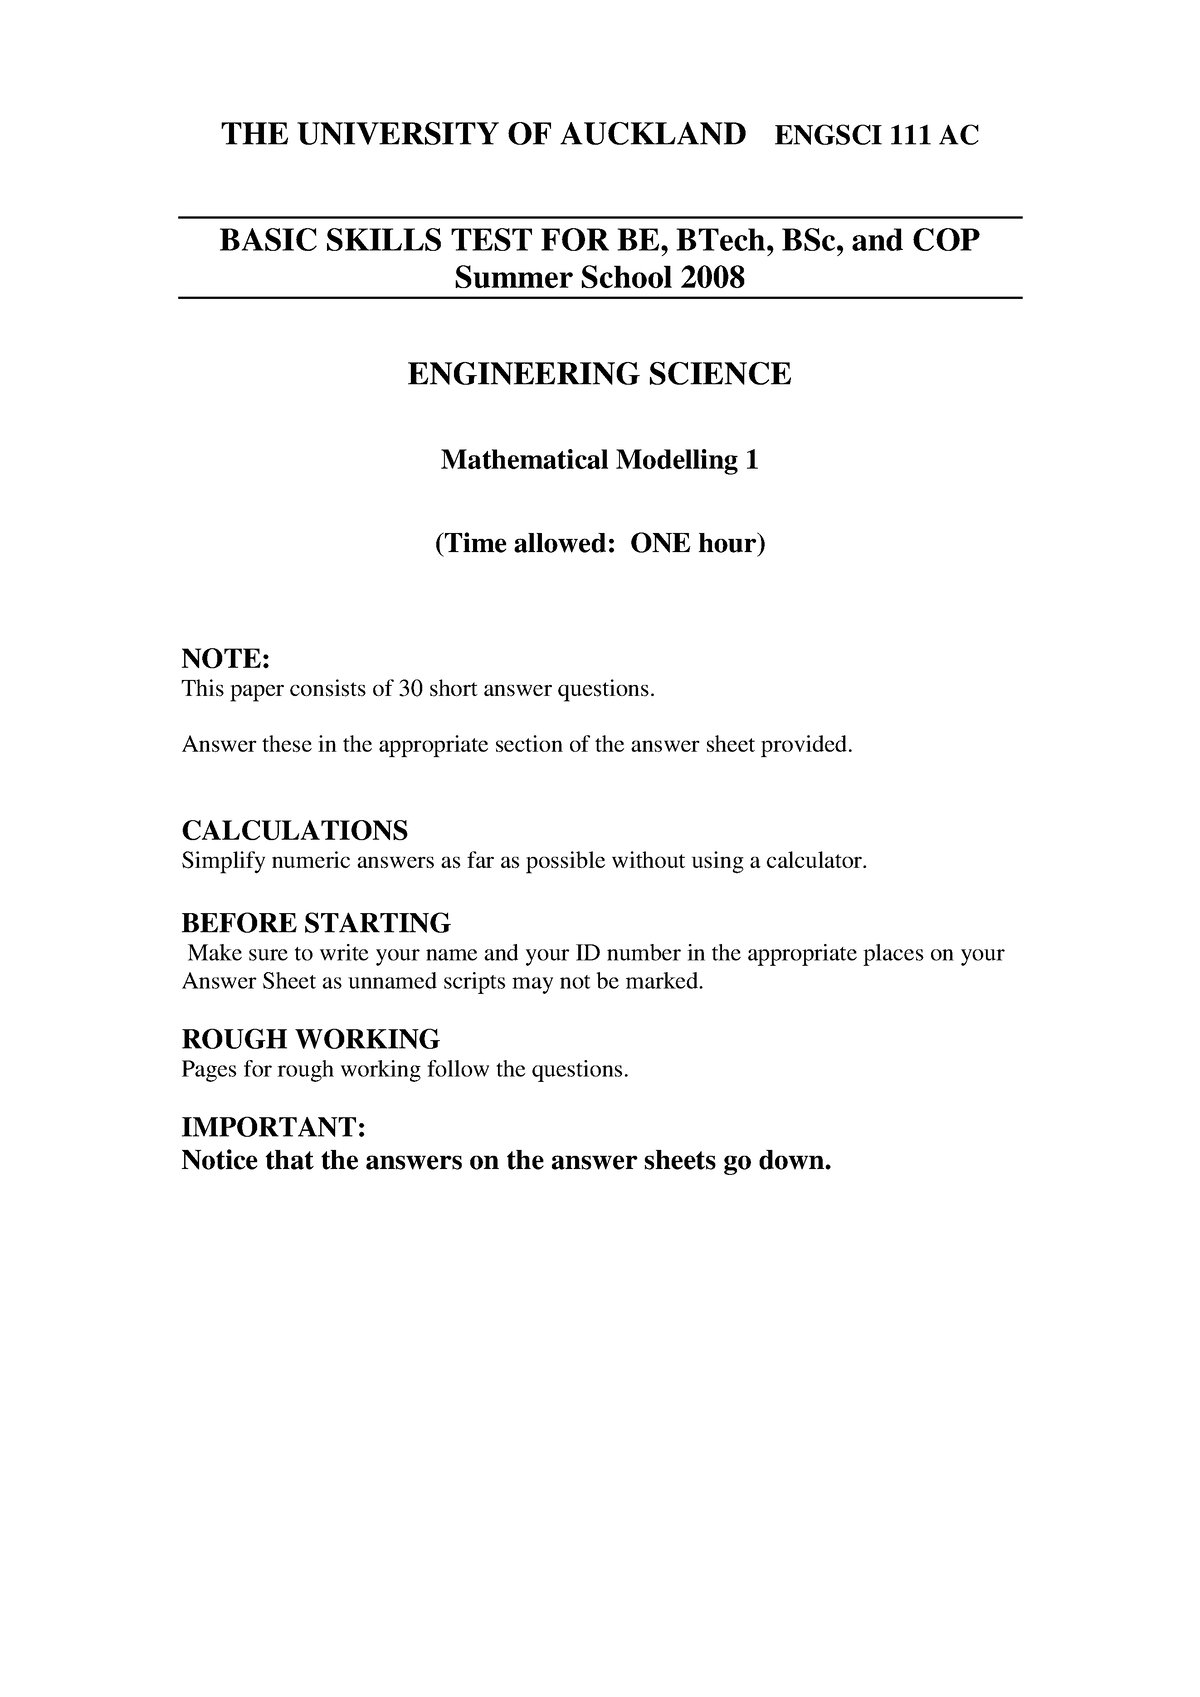 2008-ac-skills-test-the-university-of-auckland-engsci-111-ac-basic-skills-test-for-be-btech